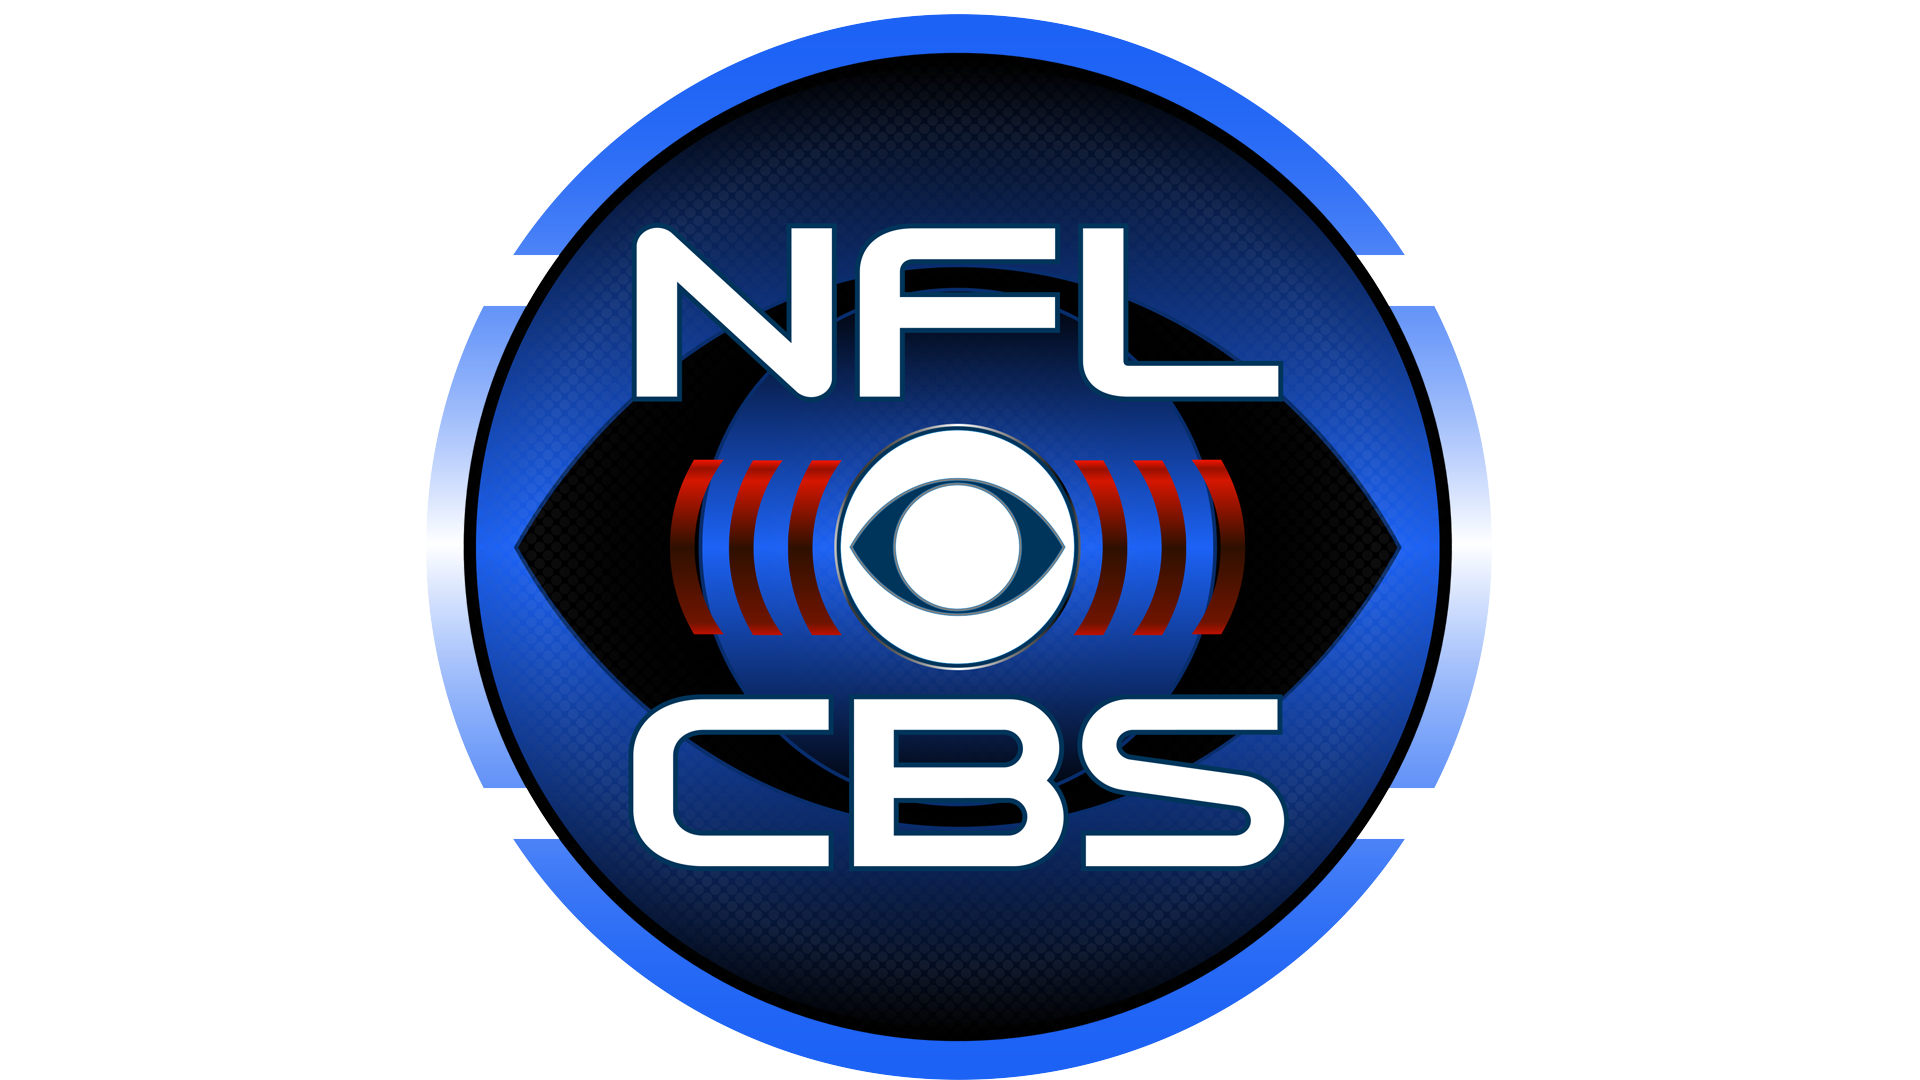 NFL Kickoff 2017: CBS Sports’ Coverage To See Changes in Front of the